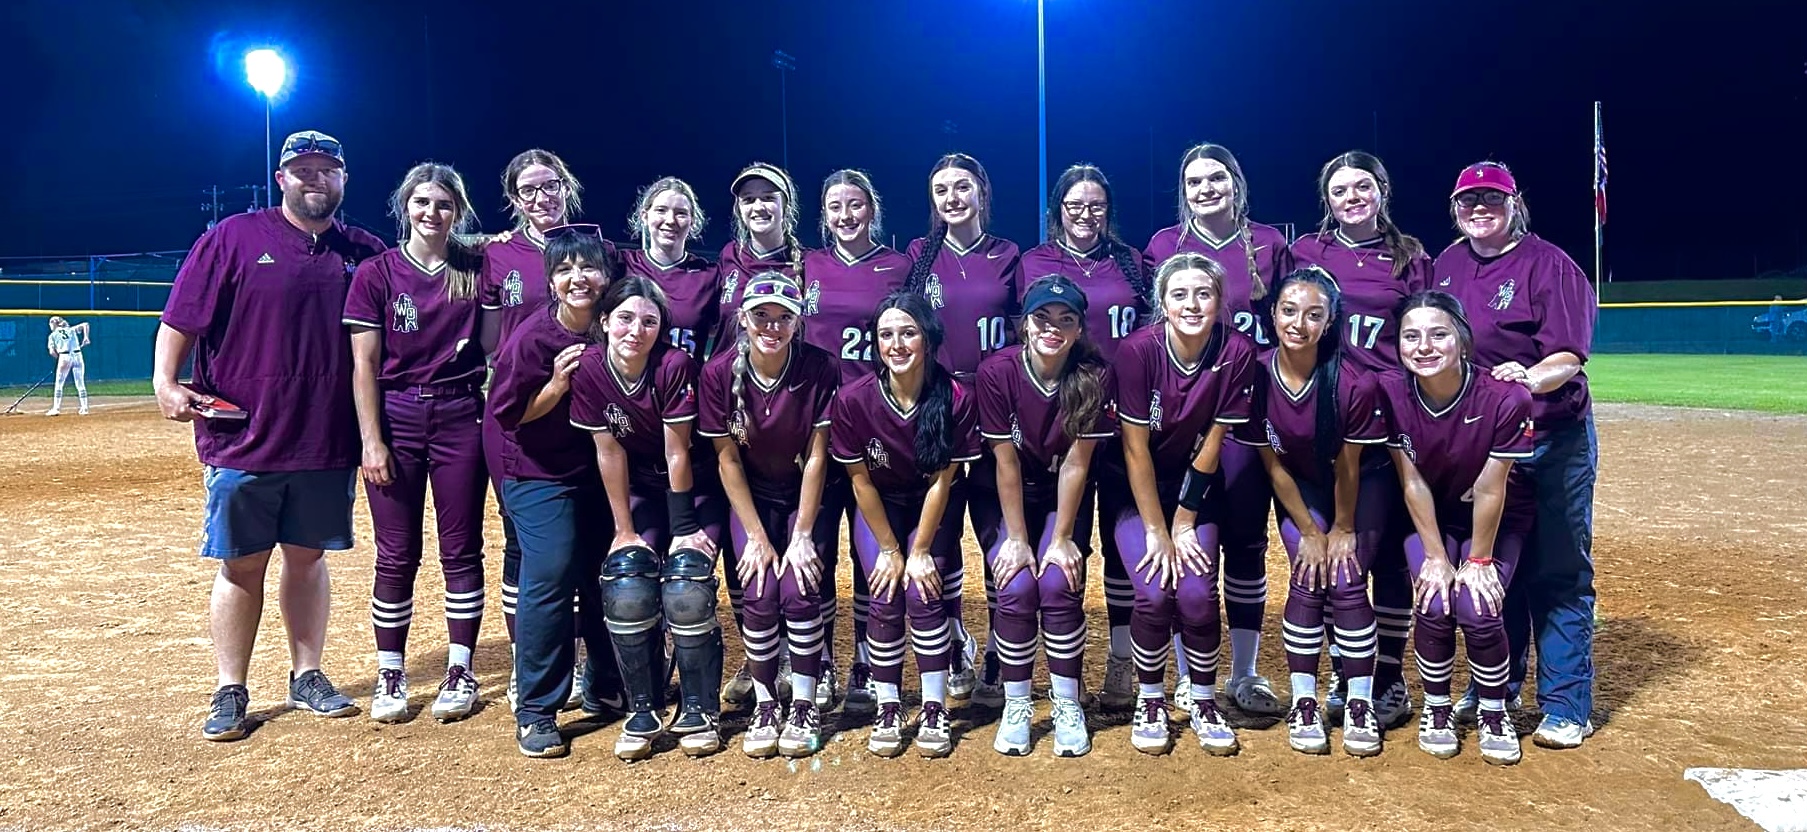 White Oak's Ladynecks, just after beating Hooks in game one of their second (or area) round best-of-three-game series 4-3 win in Marshall on Wednesday. They play game two Friday night in Marshall. The winner of the series moves to the regional quarterfinals to face either Jefferson or Mount Vernon. (Photo courtesy of WHITE OAK LADYNECK SOFTBALL)